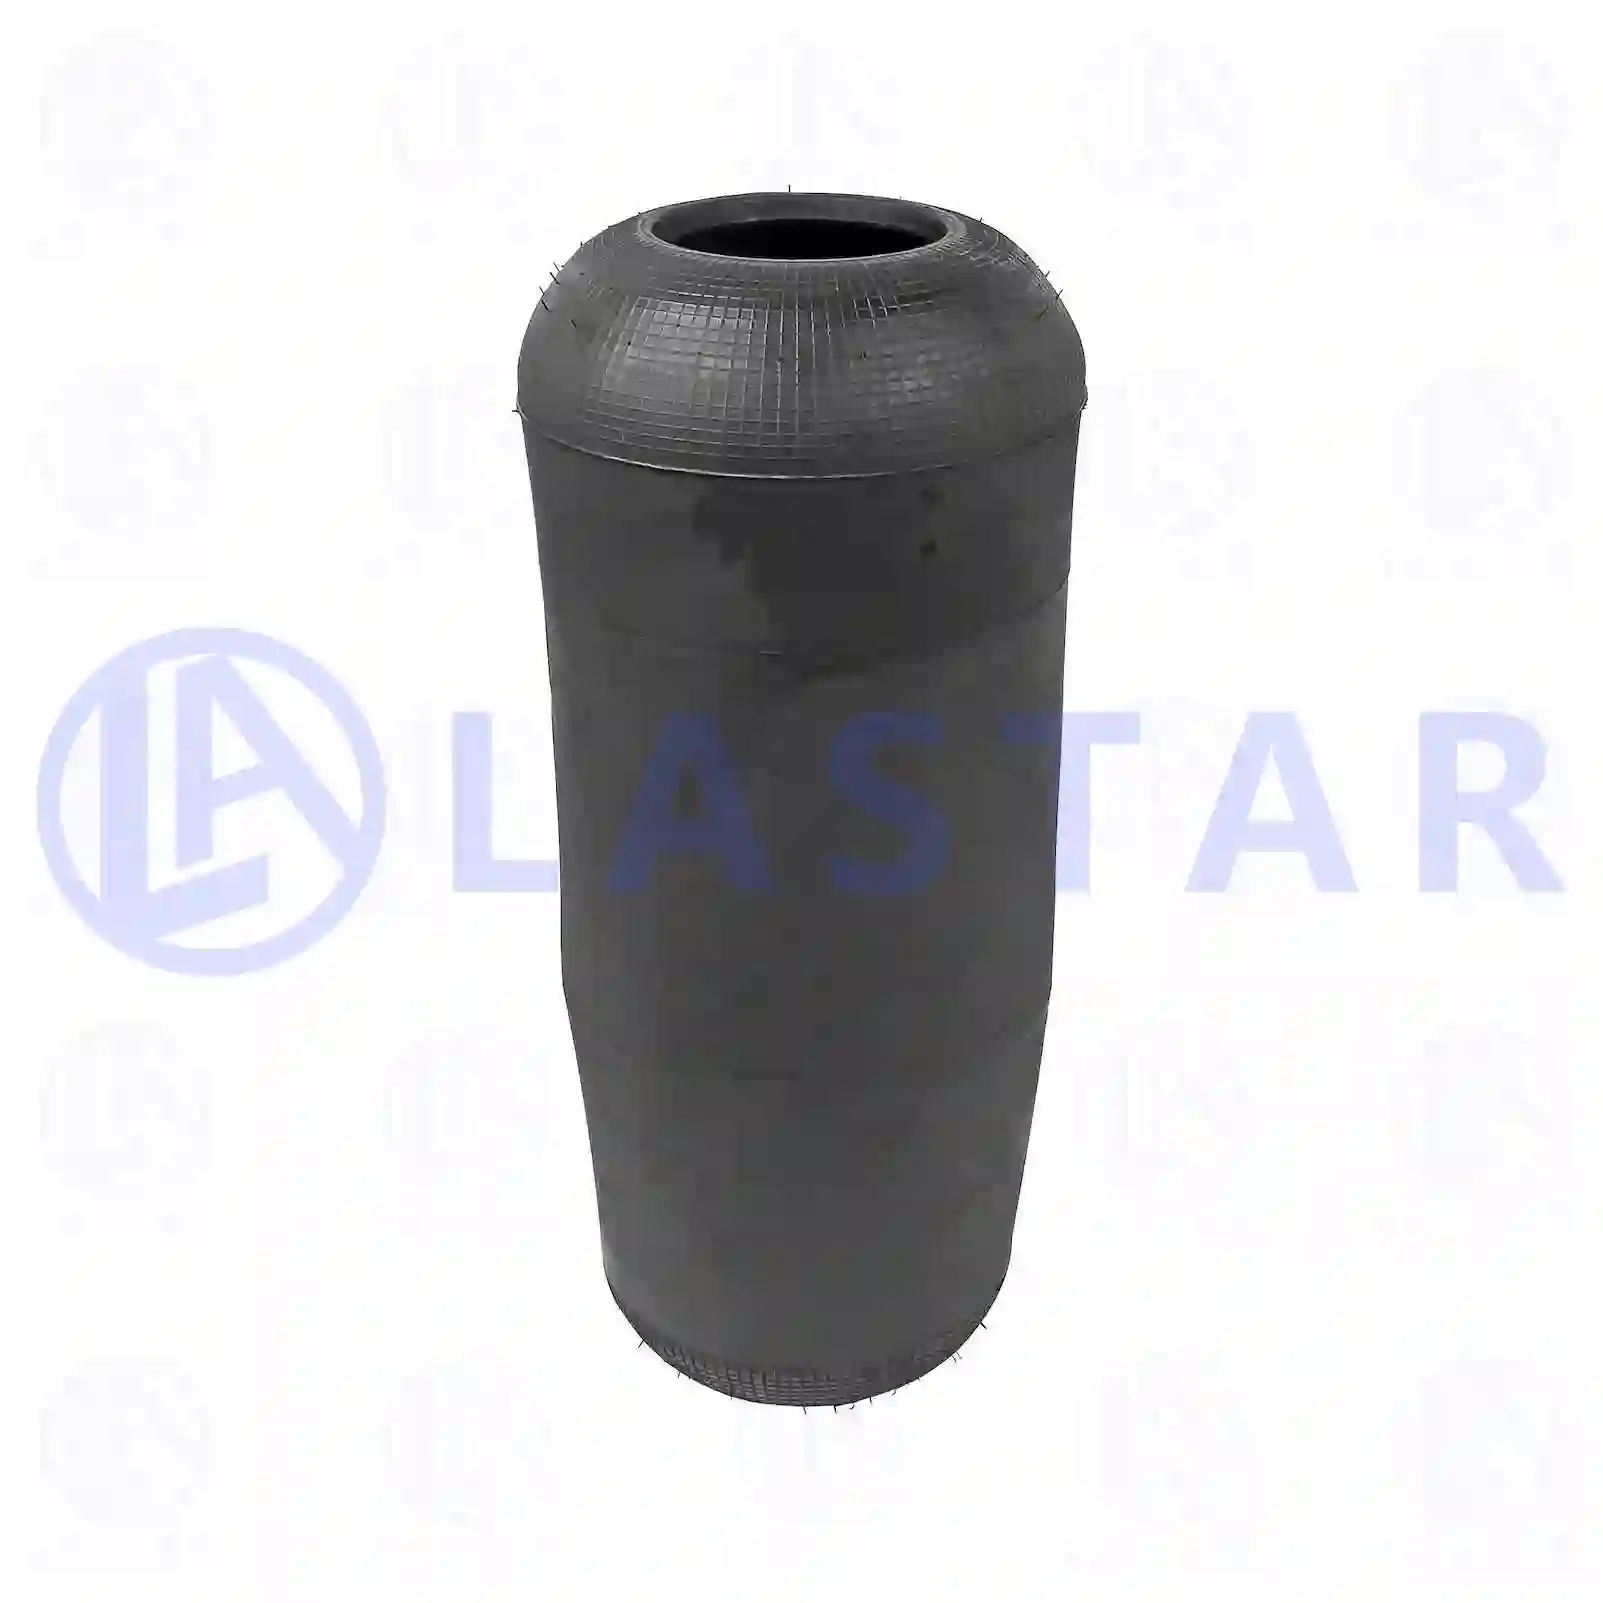 Air spring, without piston, 77728259, 6743280001, 6743280002, 6753280001 ||  77728259 Lastar Spare Part | Truck Spare Parts, Auotomotive Spare Parts Air spring, without piston, 77728259, 6743280001, 6743280002, 6753280001 ||  77728259 Lastar Spare Part | Truck Spare Parts, Auotomotive Spare Parts